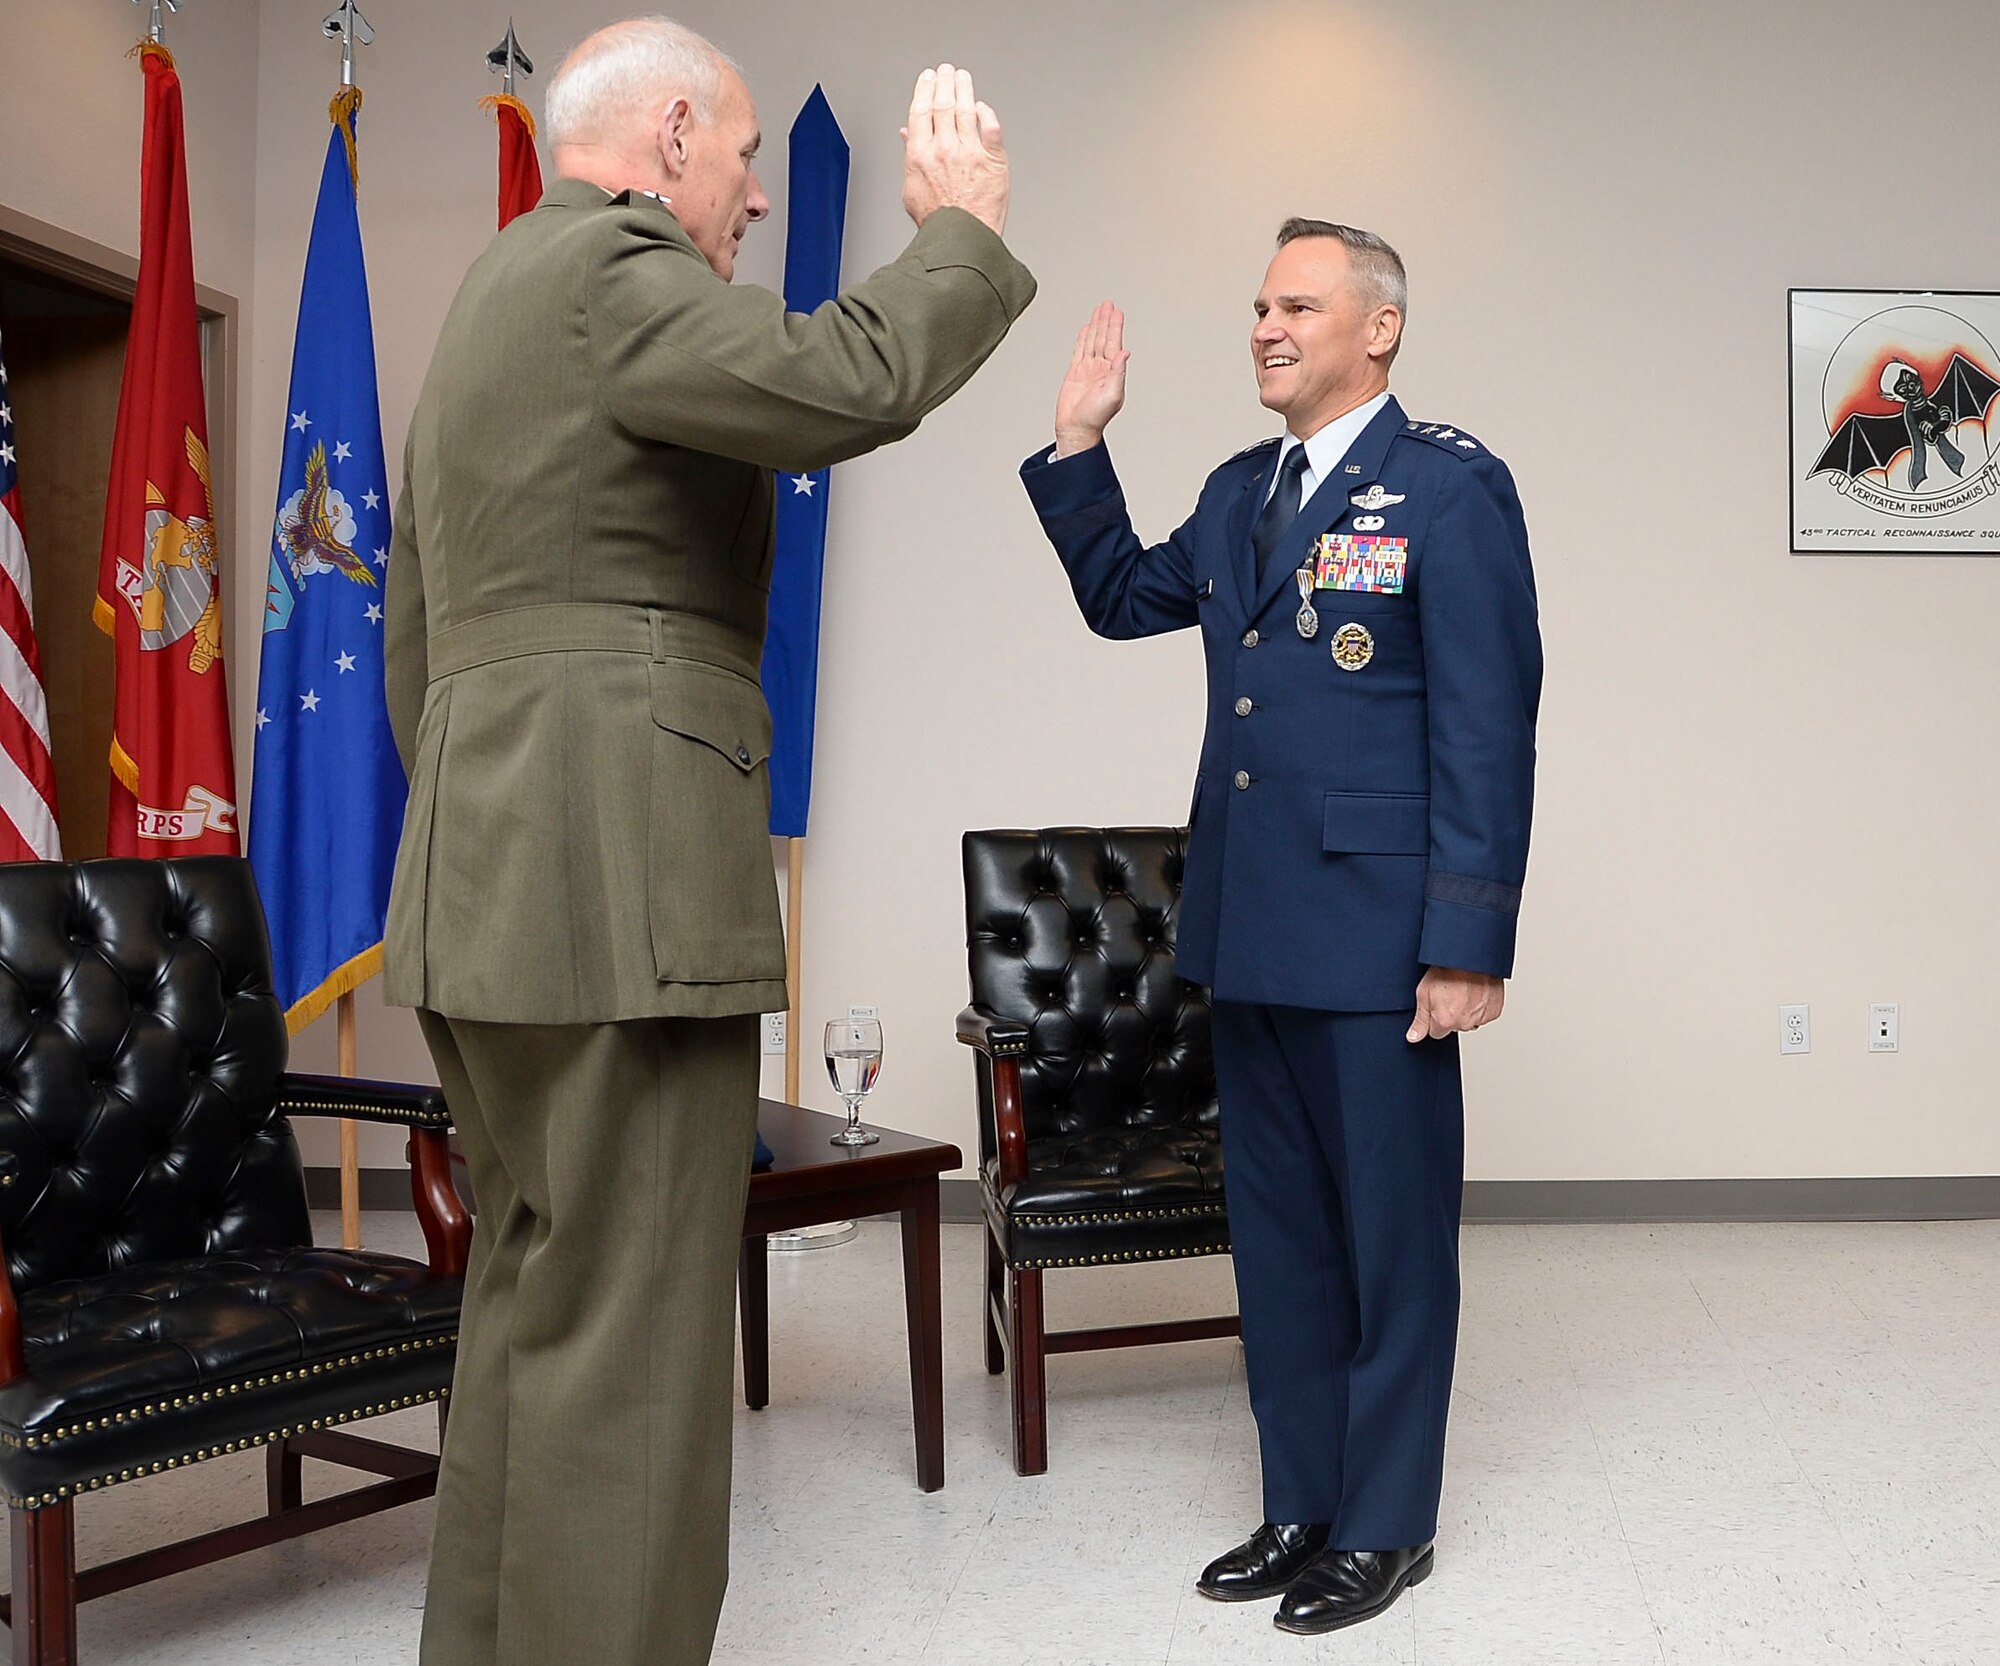 Gen. John Kelly, United States Southern Command Commander, administers the oath of office to Lt. Gen. Chris Nowland, 12th Air Force (Air Forces Southern) incoming commander, at Davis-Monthan AFB, Ariz., Dec. 19, 2014. Nowland comes to Tucson from his previous assignment as the Chief of Staff, Headquarters United States Southern Command, where he was responsible for successfully integrating and synchronizing the efforts of nine directorates and 16 special staff offices in support of the Combatant Commander's Theater Campaign Plan. (U.S. Air Force photo by Staff Sgt. Adam Grant/Released)